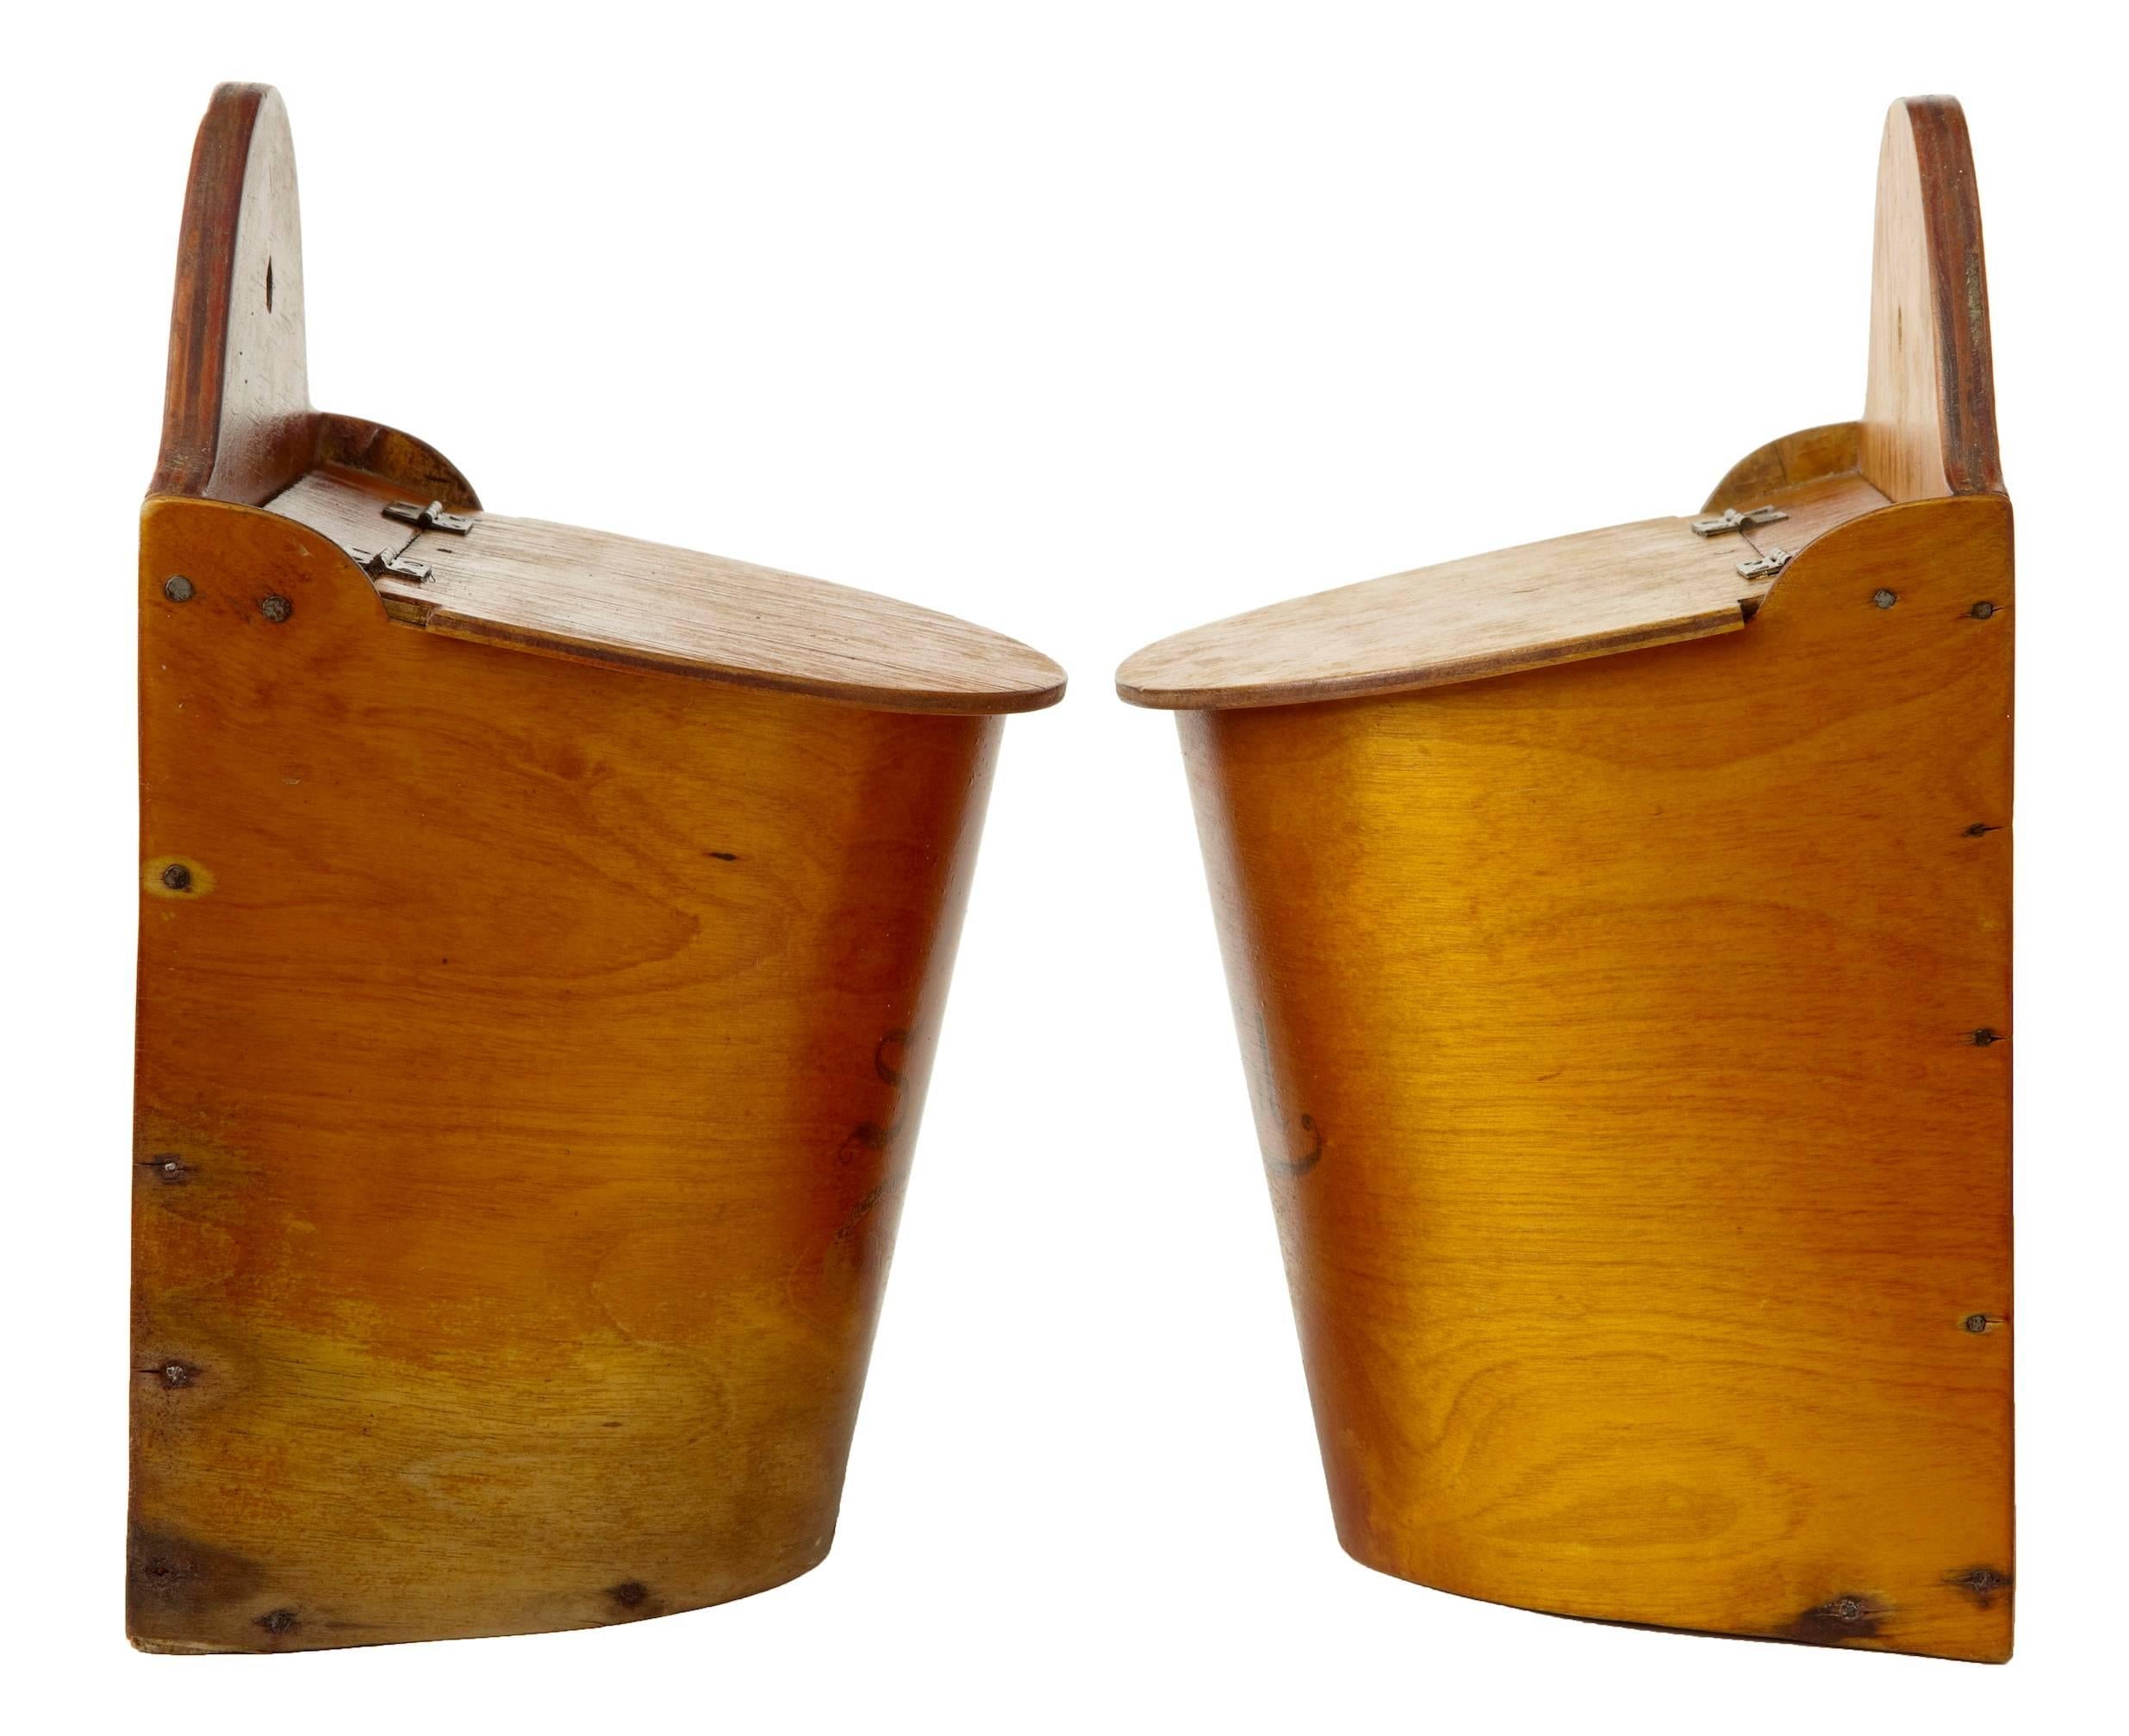 Rustic Pair of 19th Century Swedish Birch Salt and Pepper Containers